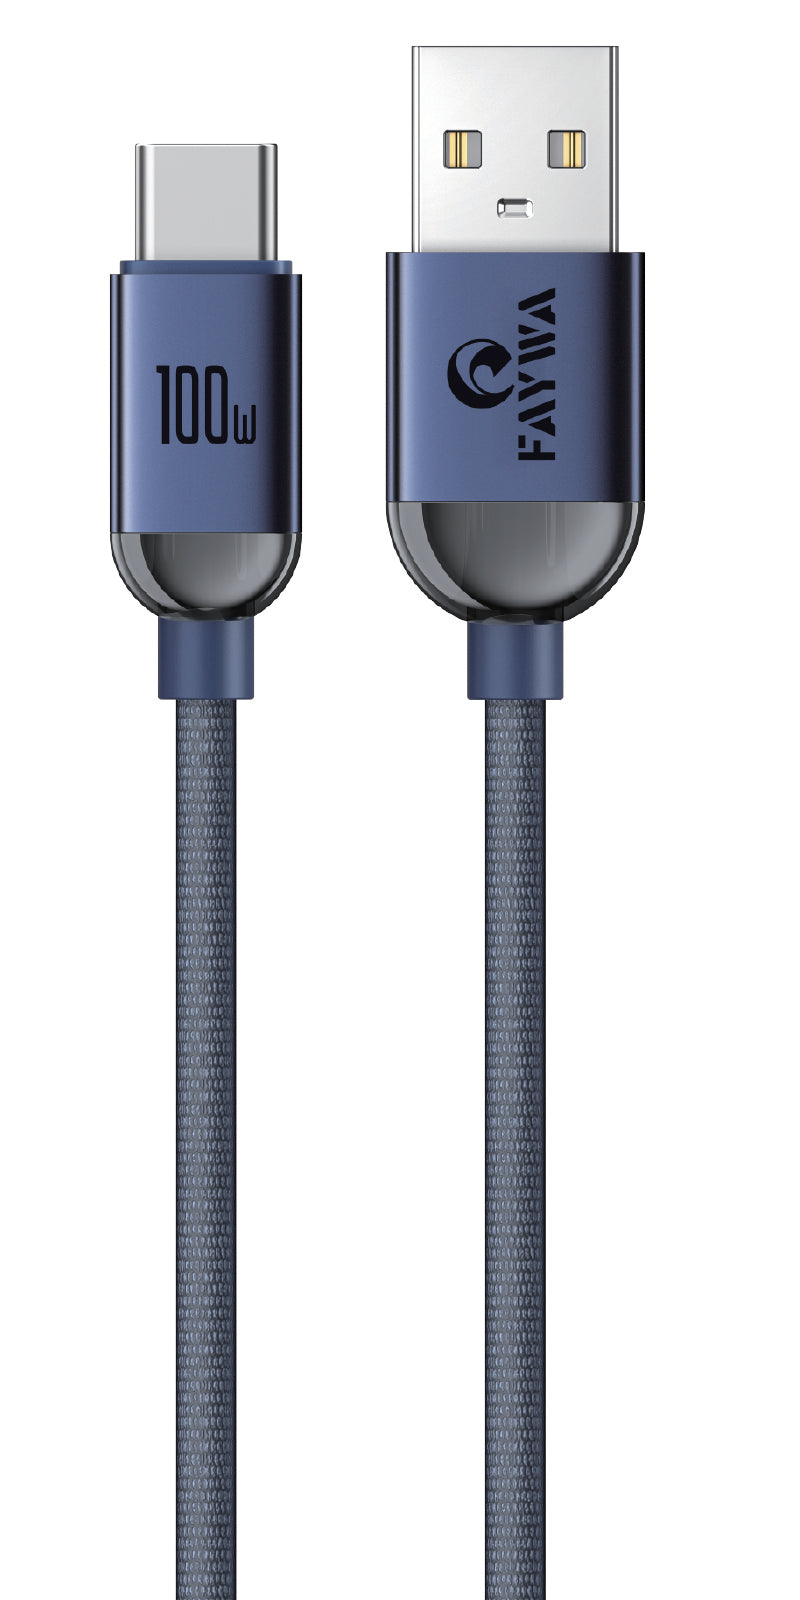 FAYWA MASTER 1 (Fast Charge USB Type C Cable - 100W) - My Store